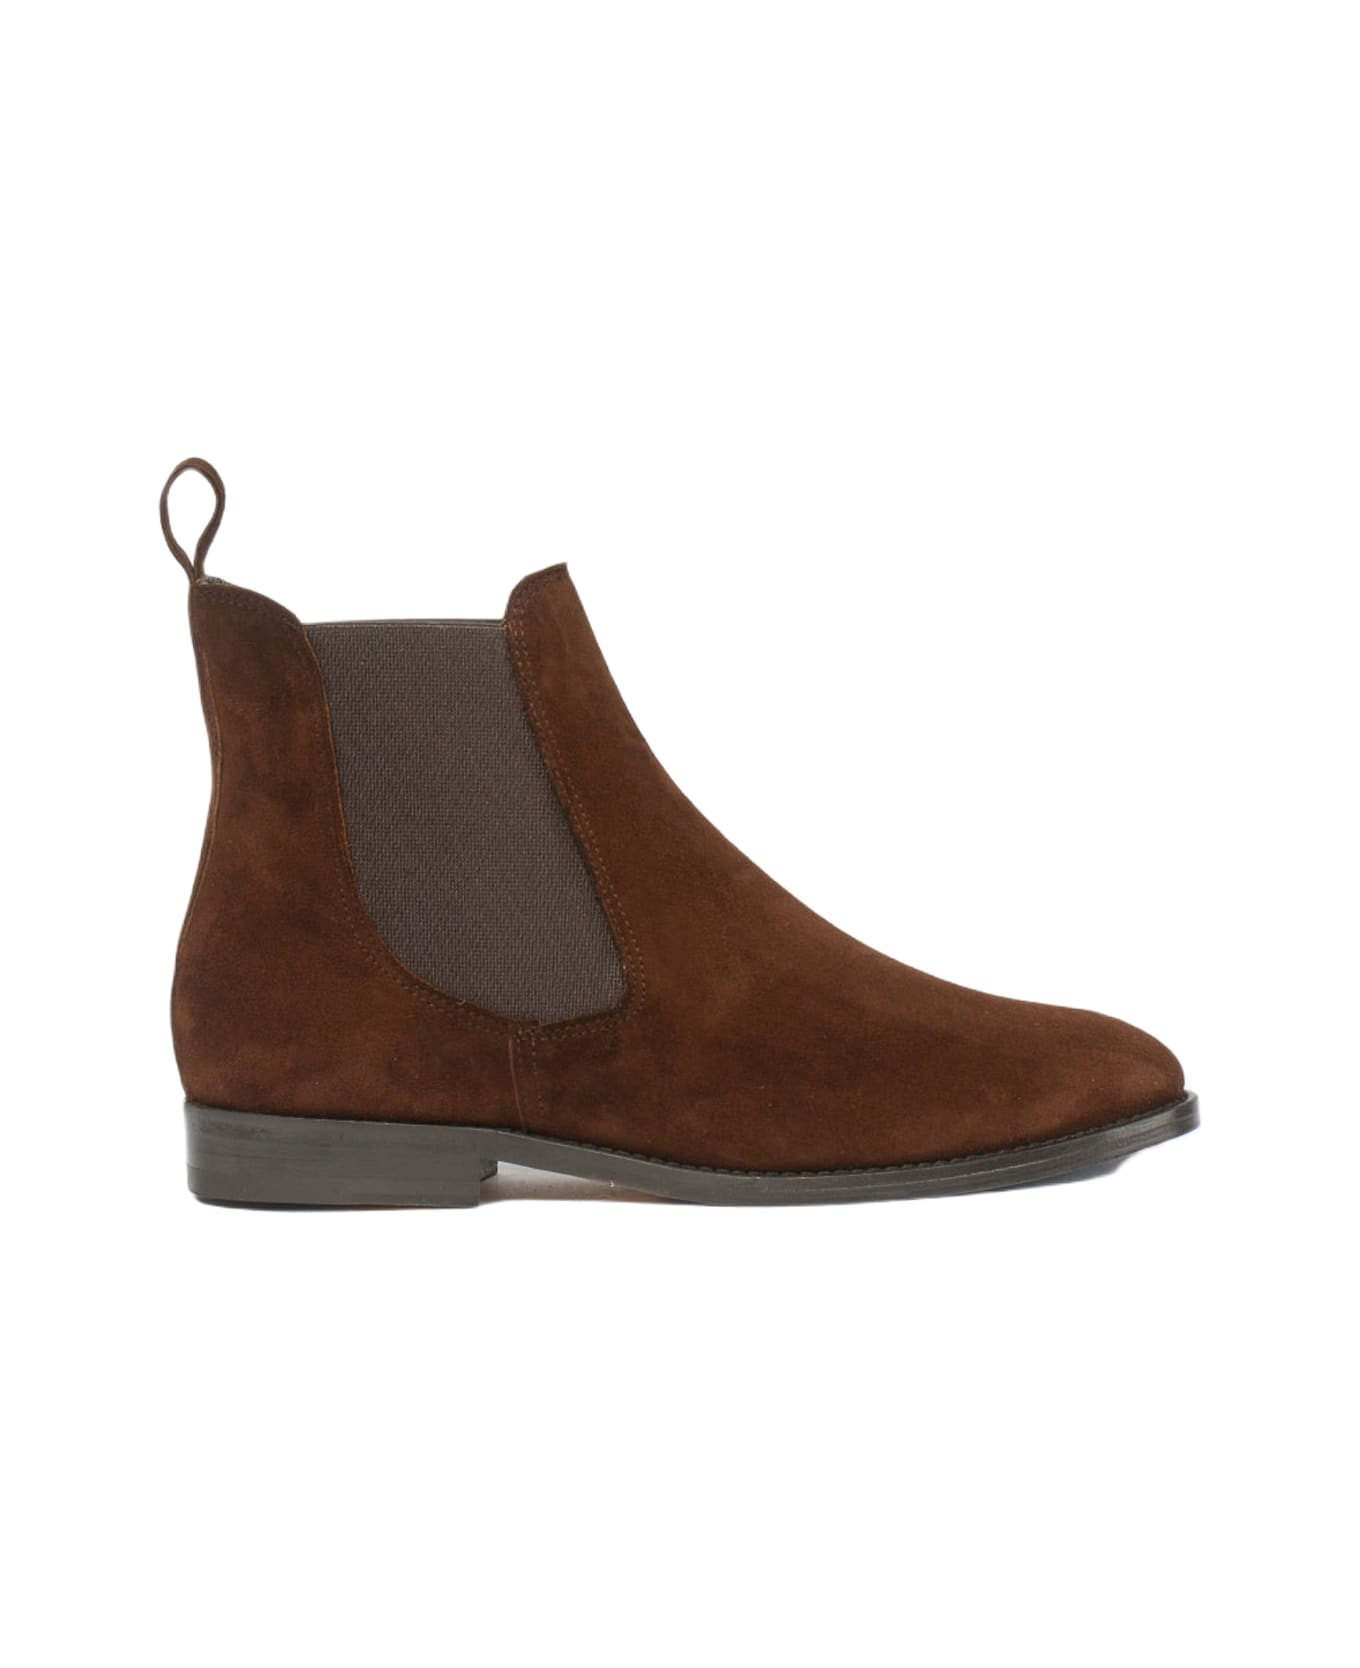 CB Made in Italy Suede Boots Sessanta - Brown